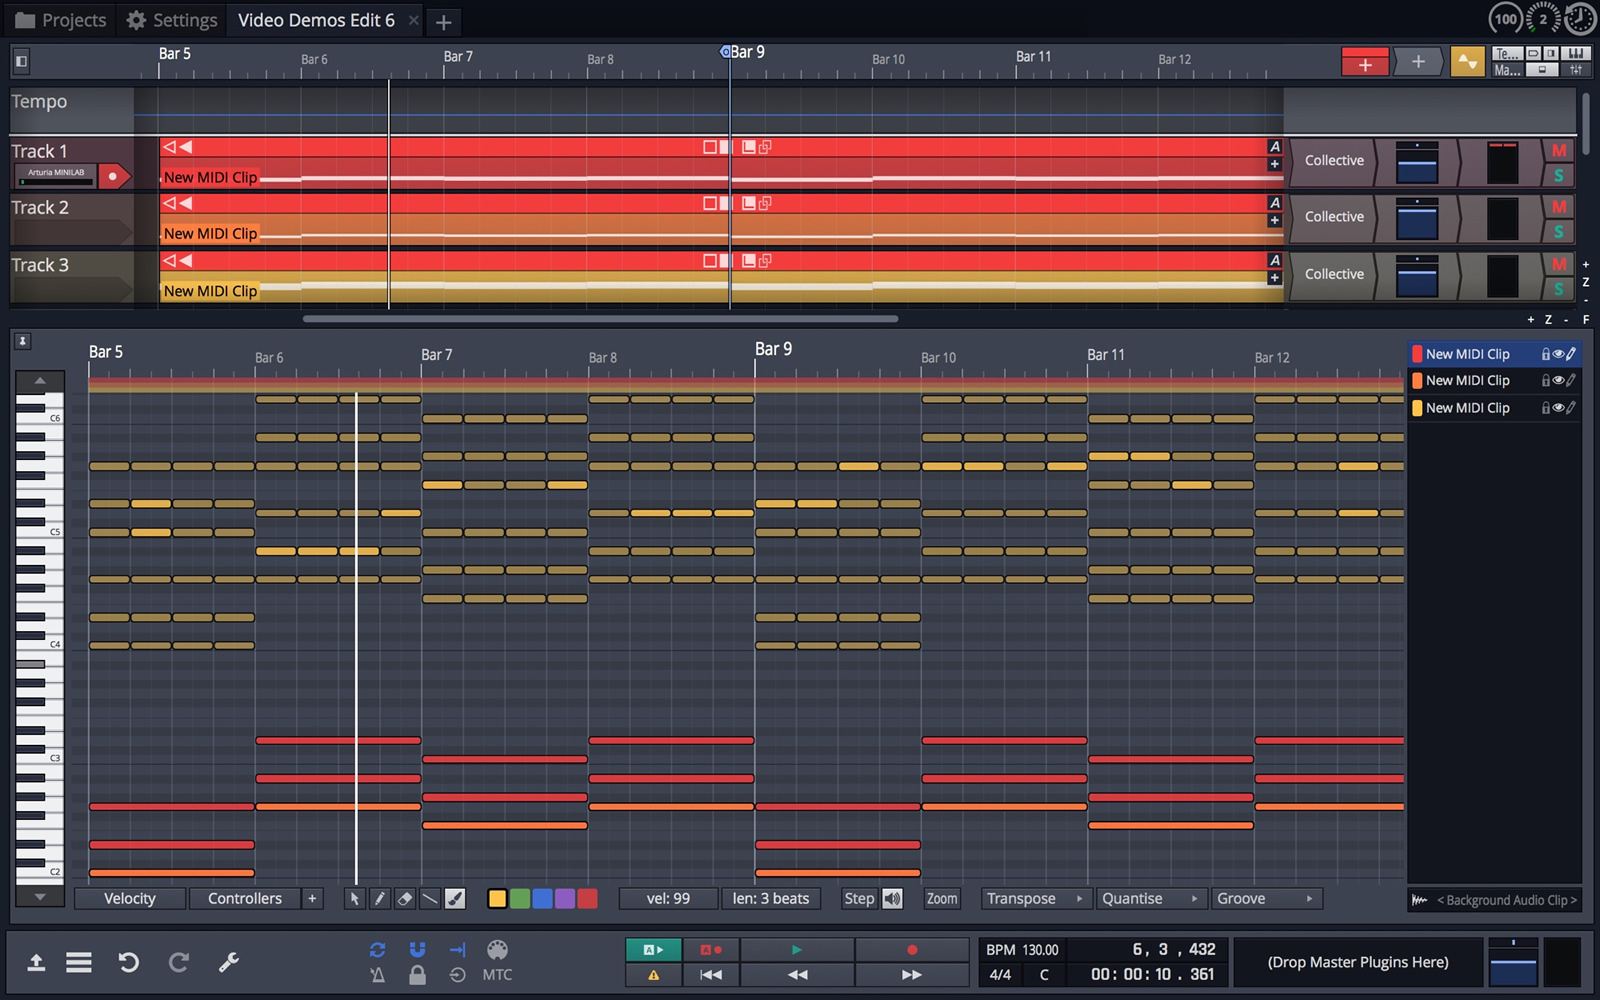 Free Music Production Software - 21 Best Music Production Software Reviews 2021 (DAW ... - You must be wondering why does reaper feature on this list of free music production software when it asks you to pay a nominal $60 fee after free trial?